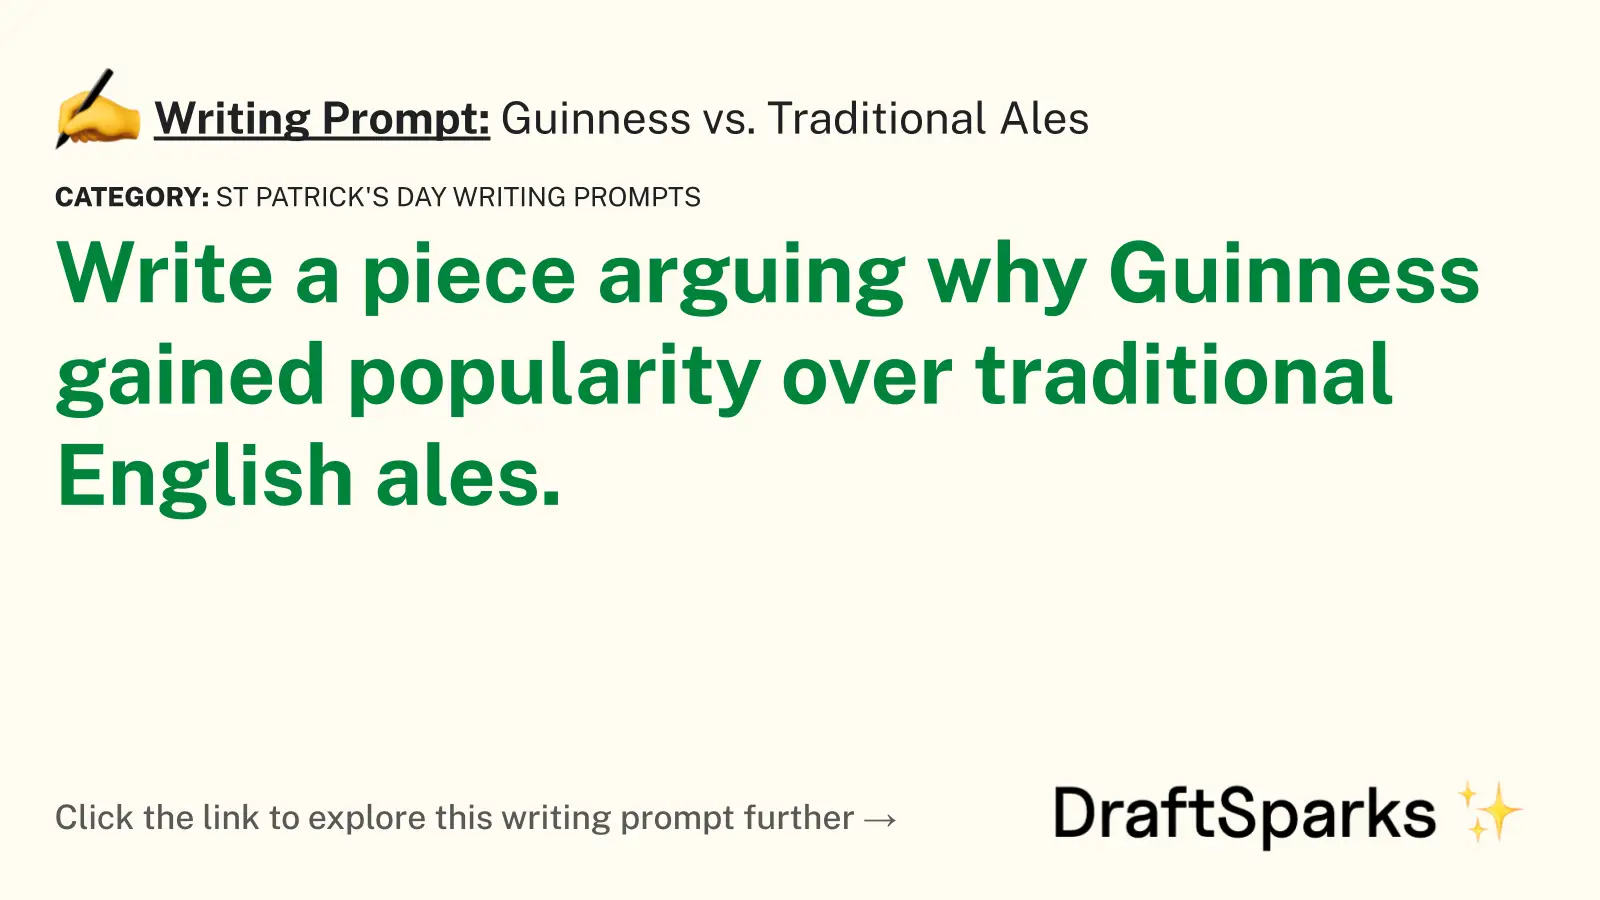 Guinness vs. Traditional Ales